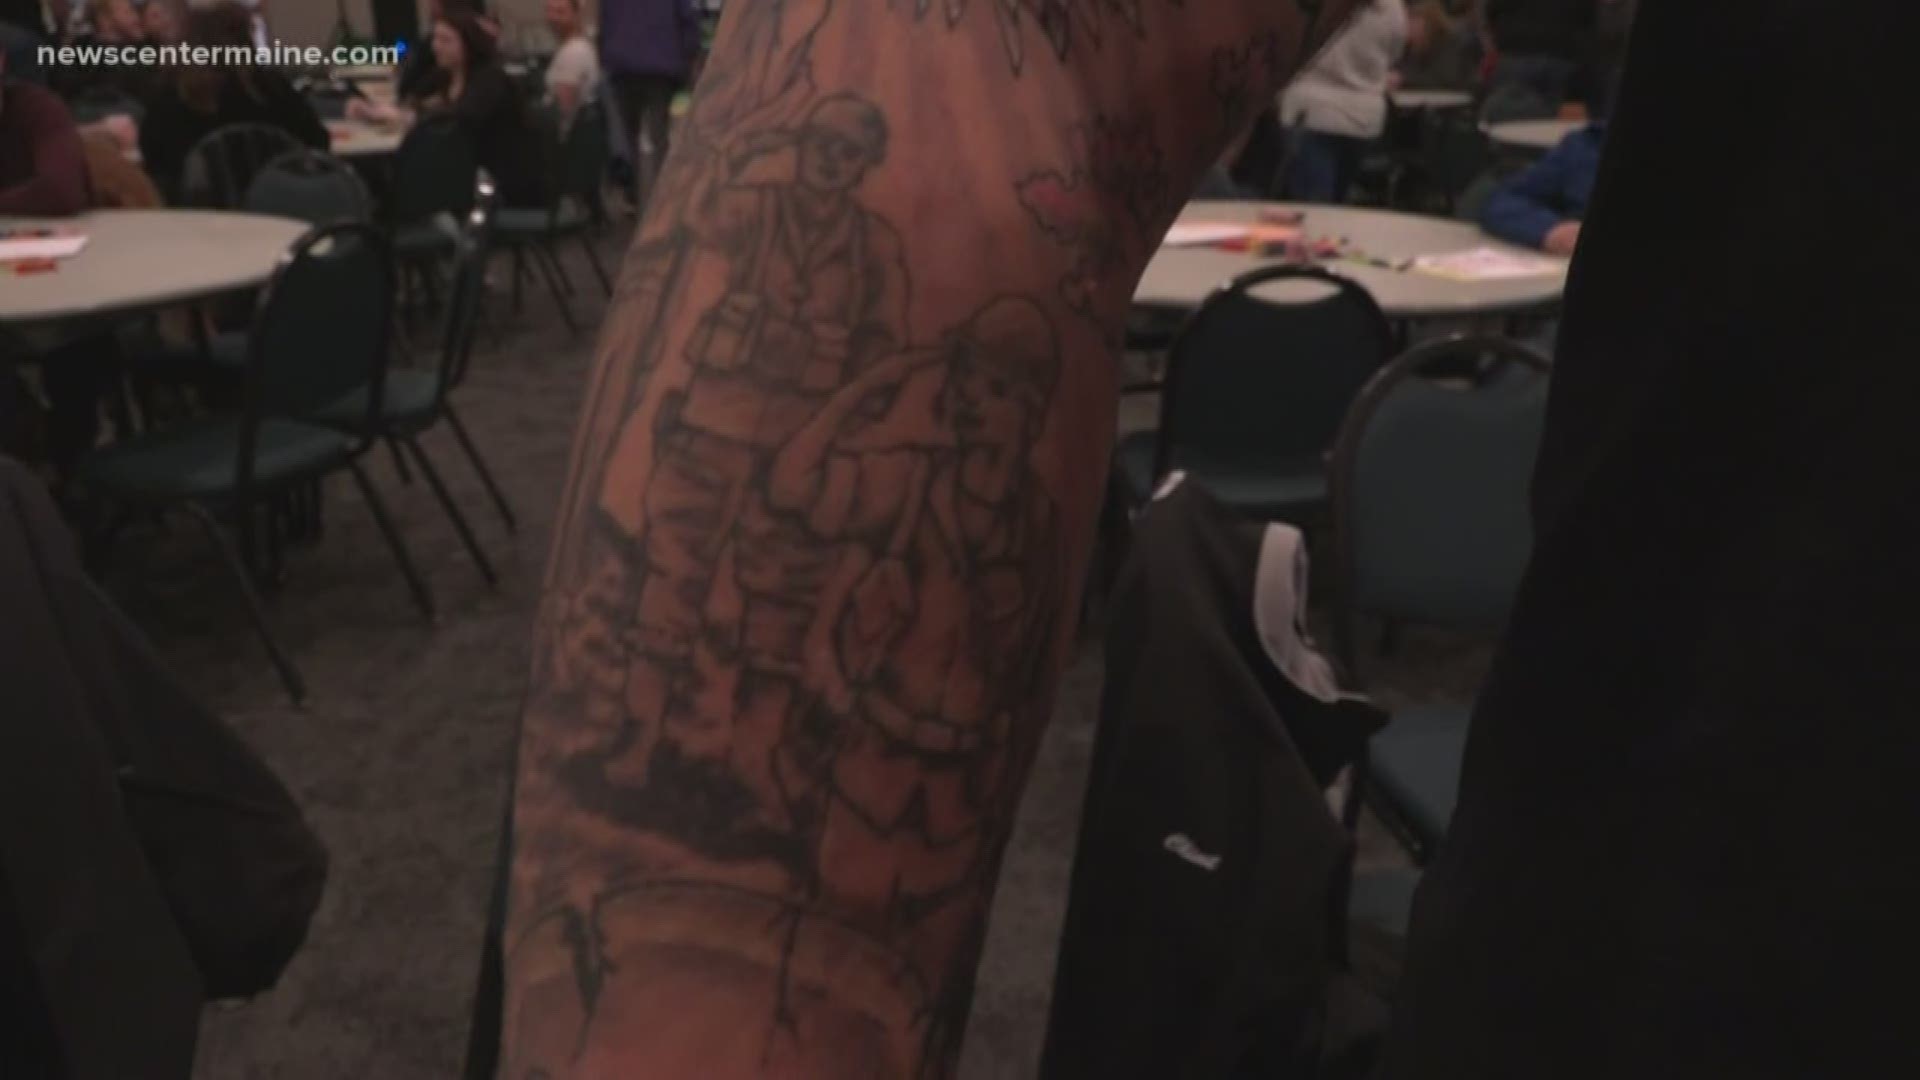 Folks are rolling up their sleeves and showing off their ink for the Veteran's Benefit Tattoo Contest.